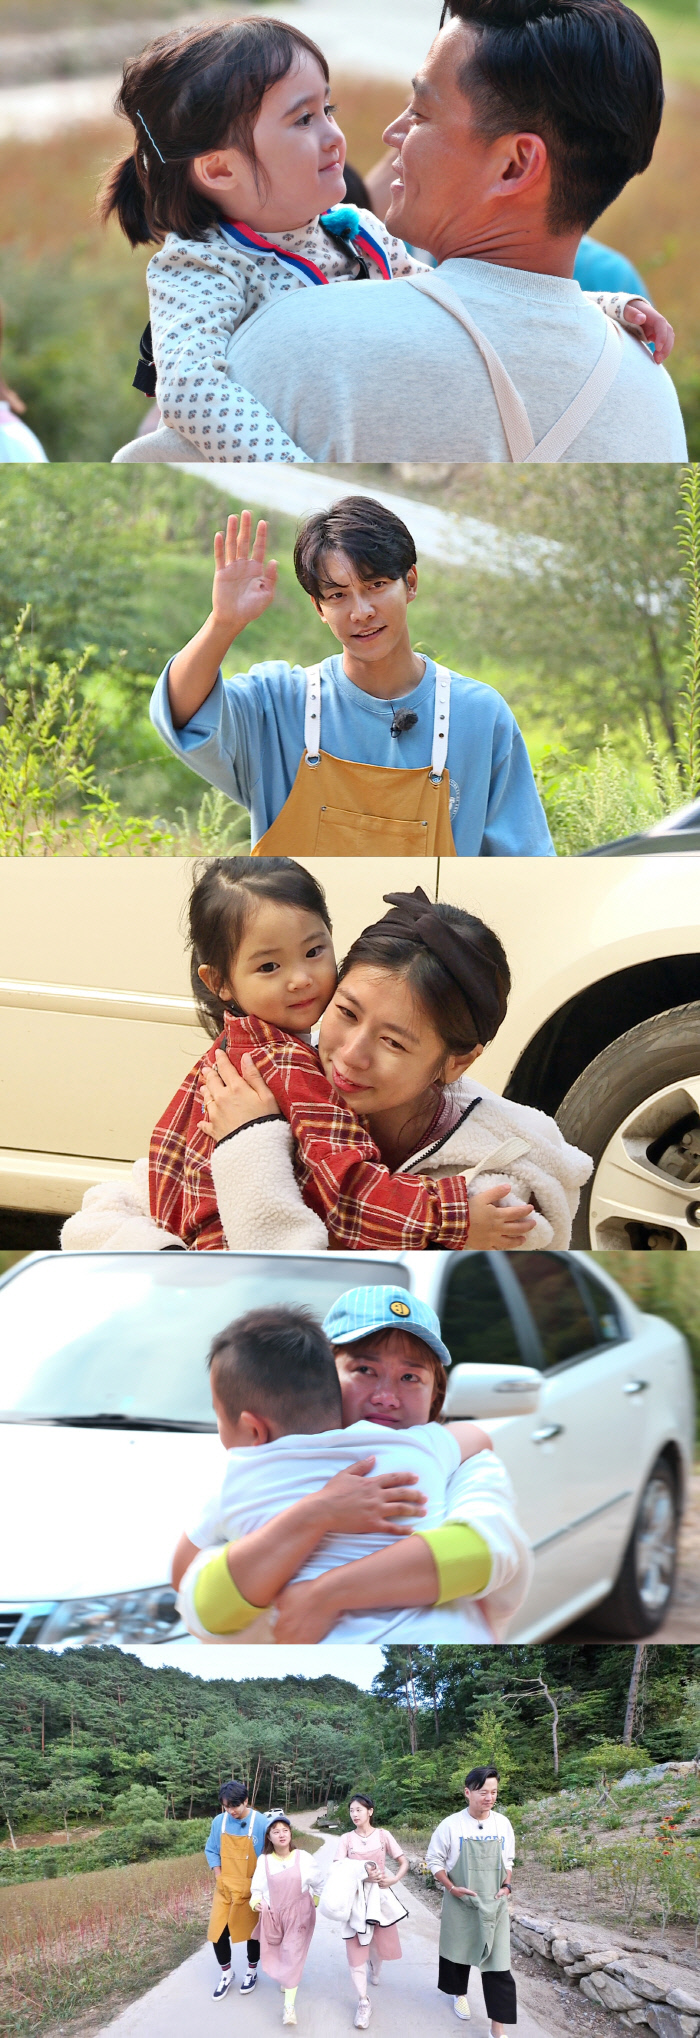 Lee Seo-jin, Lee Seung-gi, Park Na-rae, Jung So-min, four members and Little are making a good farewell.Little Forest: Summer of the Bakgol (hereinafter referred to as Little Forest), which has made a big headline with its extraordinary formation called Wallhwa Arts for the first time on terrestrial broadcasting and a brilliant lineup called Lee Seo-jin X Lee Seung-gi X Park Na-rae X Jung So-min, will finish the 16-part long-term episode after the broadcast today (7th).On this day, the members shared their last greetings with the little ones they had chosen.Jung So-min poured tears for a long time at Brookes words, I will be Little Forests aunt when I grow up, and Park Na-rae, who had been tearing until the end, also showed tears of regret.Lee Seung-gi, who pretended to be cool, also caught the eye with a stir.Finally, Lee Seo-jin, a Sosweet Nam who confessed that he had never seen tears in any broadcast, also surprised everyone with his appearance.Lee Seo-jin, the 21st year of his debut, draws attention to why he first tears up on the show.The affectionate farewell of aunts, uncles and littles can be confirmed at the final episode of Little Forest, which airs at 10 pm this afternoon.